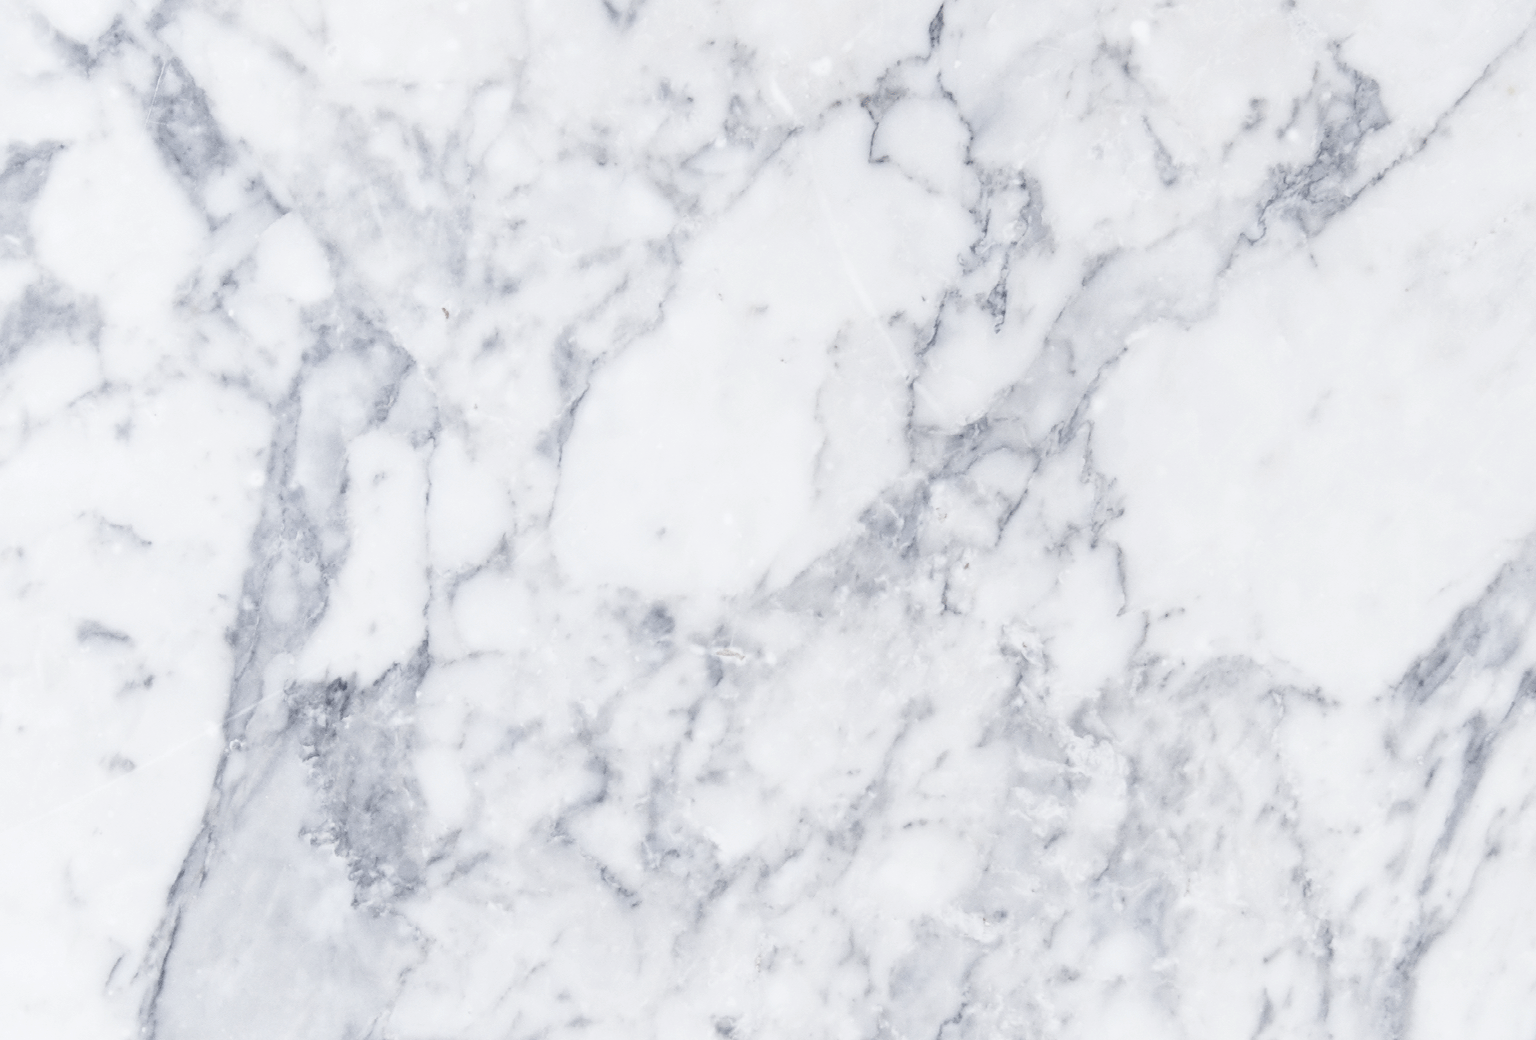 White Marble Hd Wallpapers Top Free White Marble Hd Backgrounds Wallpaperaccess